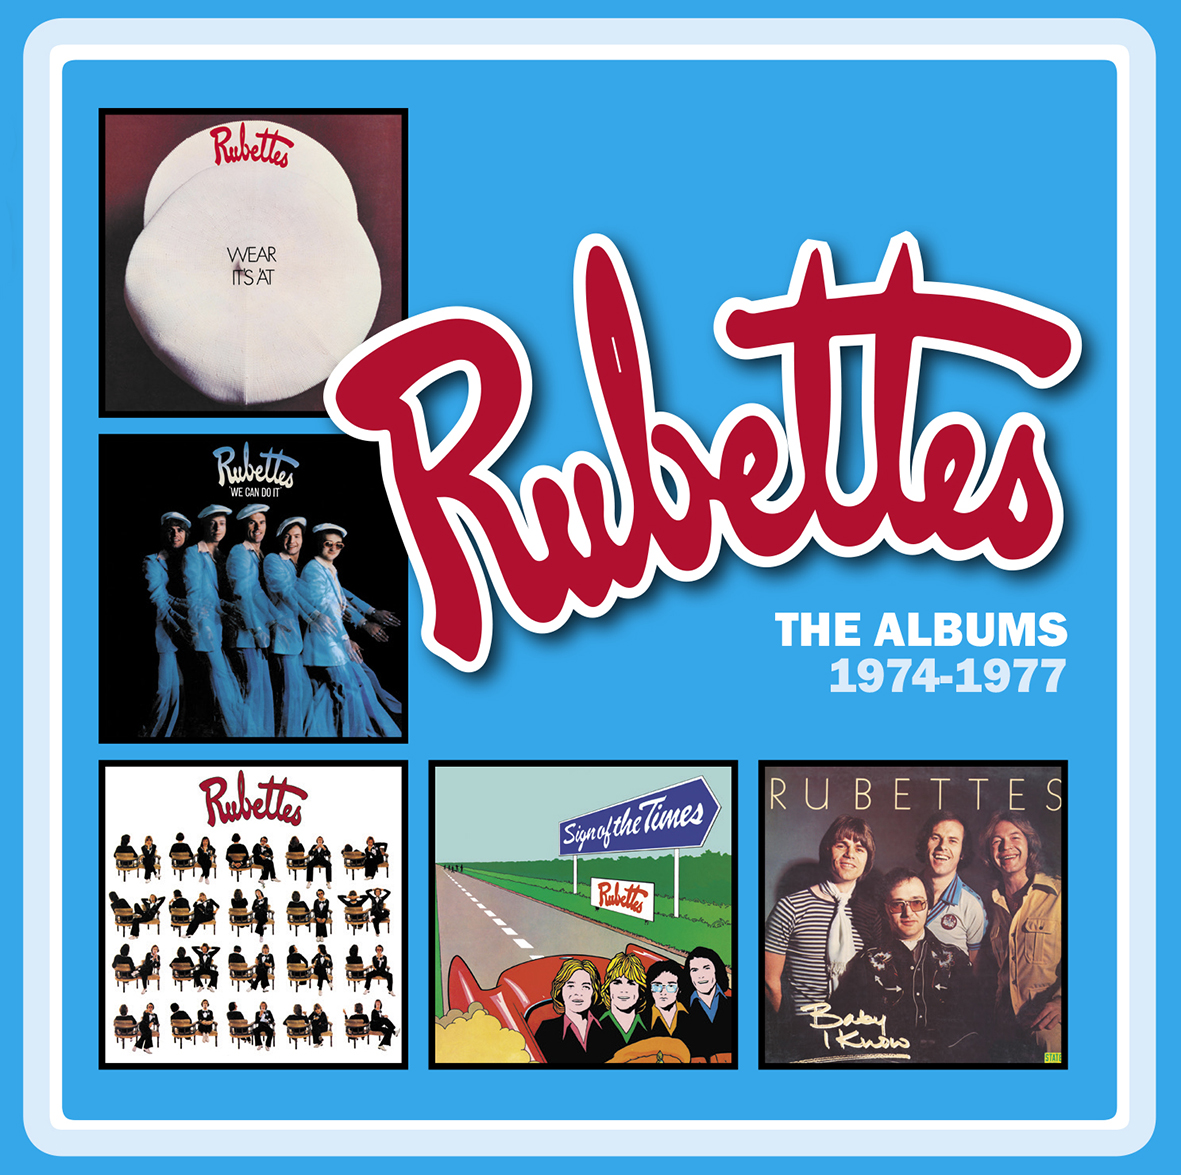 The Albums 1974-1977